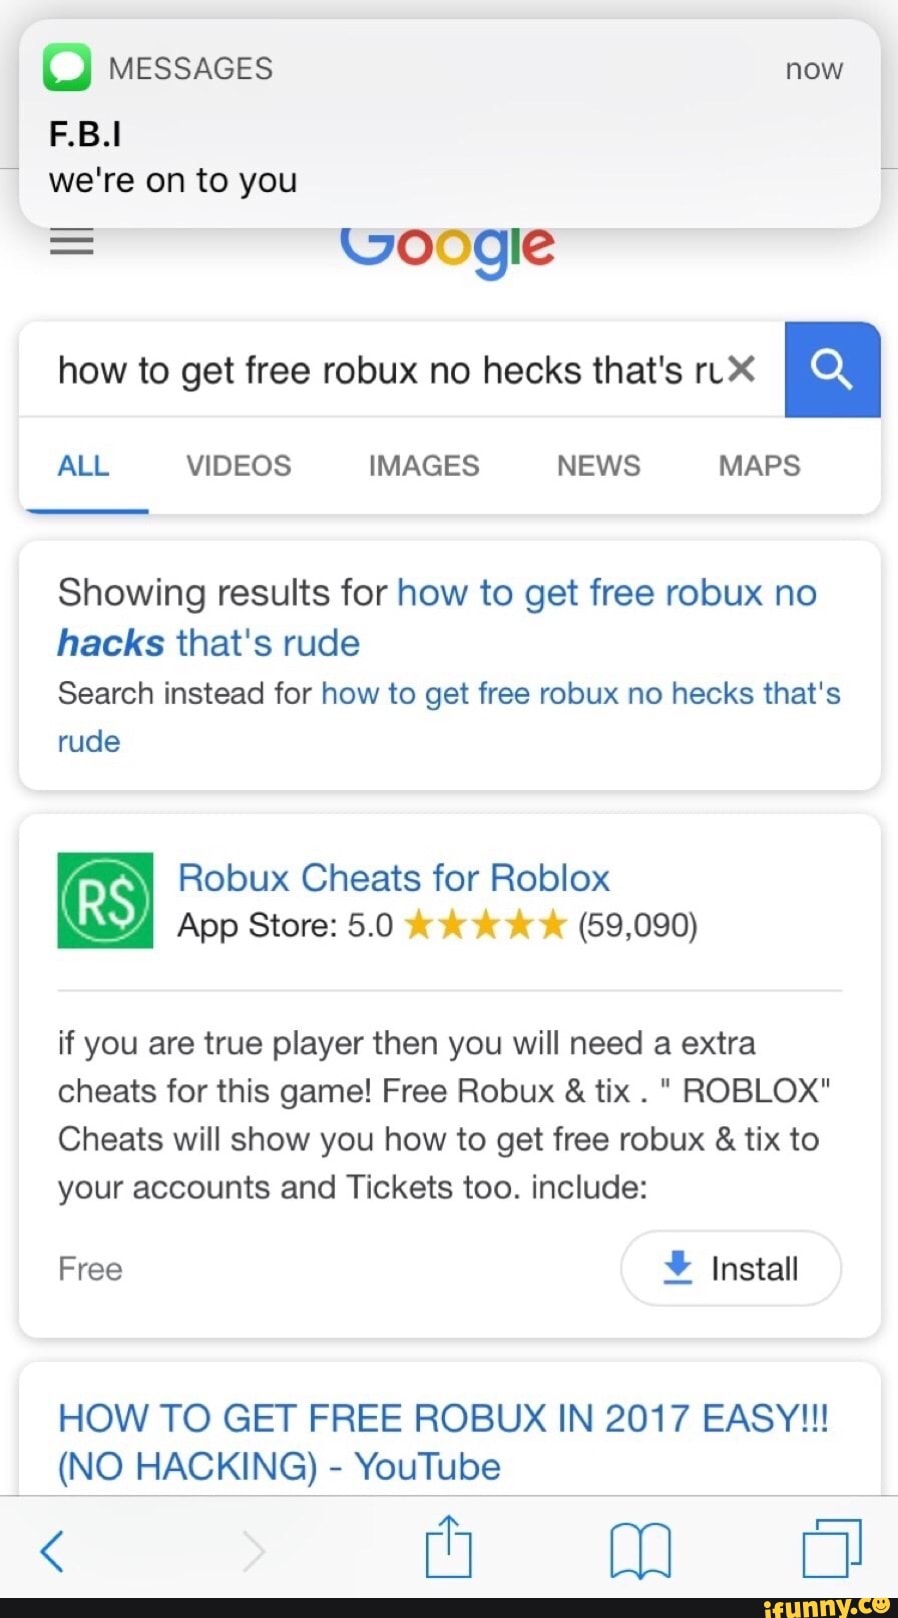 We Re On To You D Messages Now How To Get Free Robux No Hecks That S Rlx Showing Results For How To Get Free Robux No Hacks That S Rude Search Instead For How - roblox tix hack